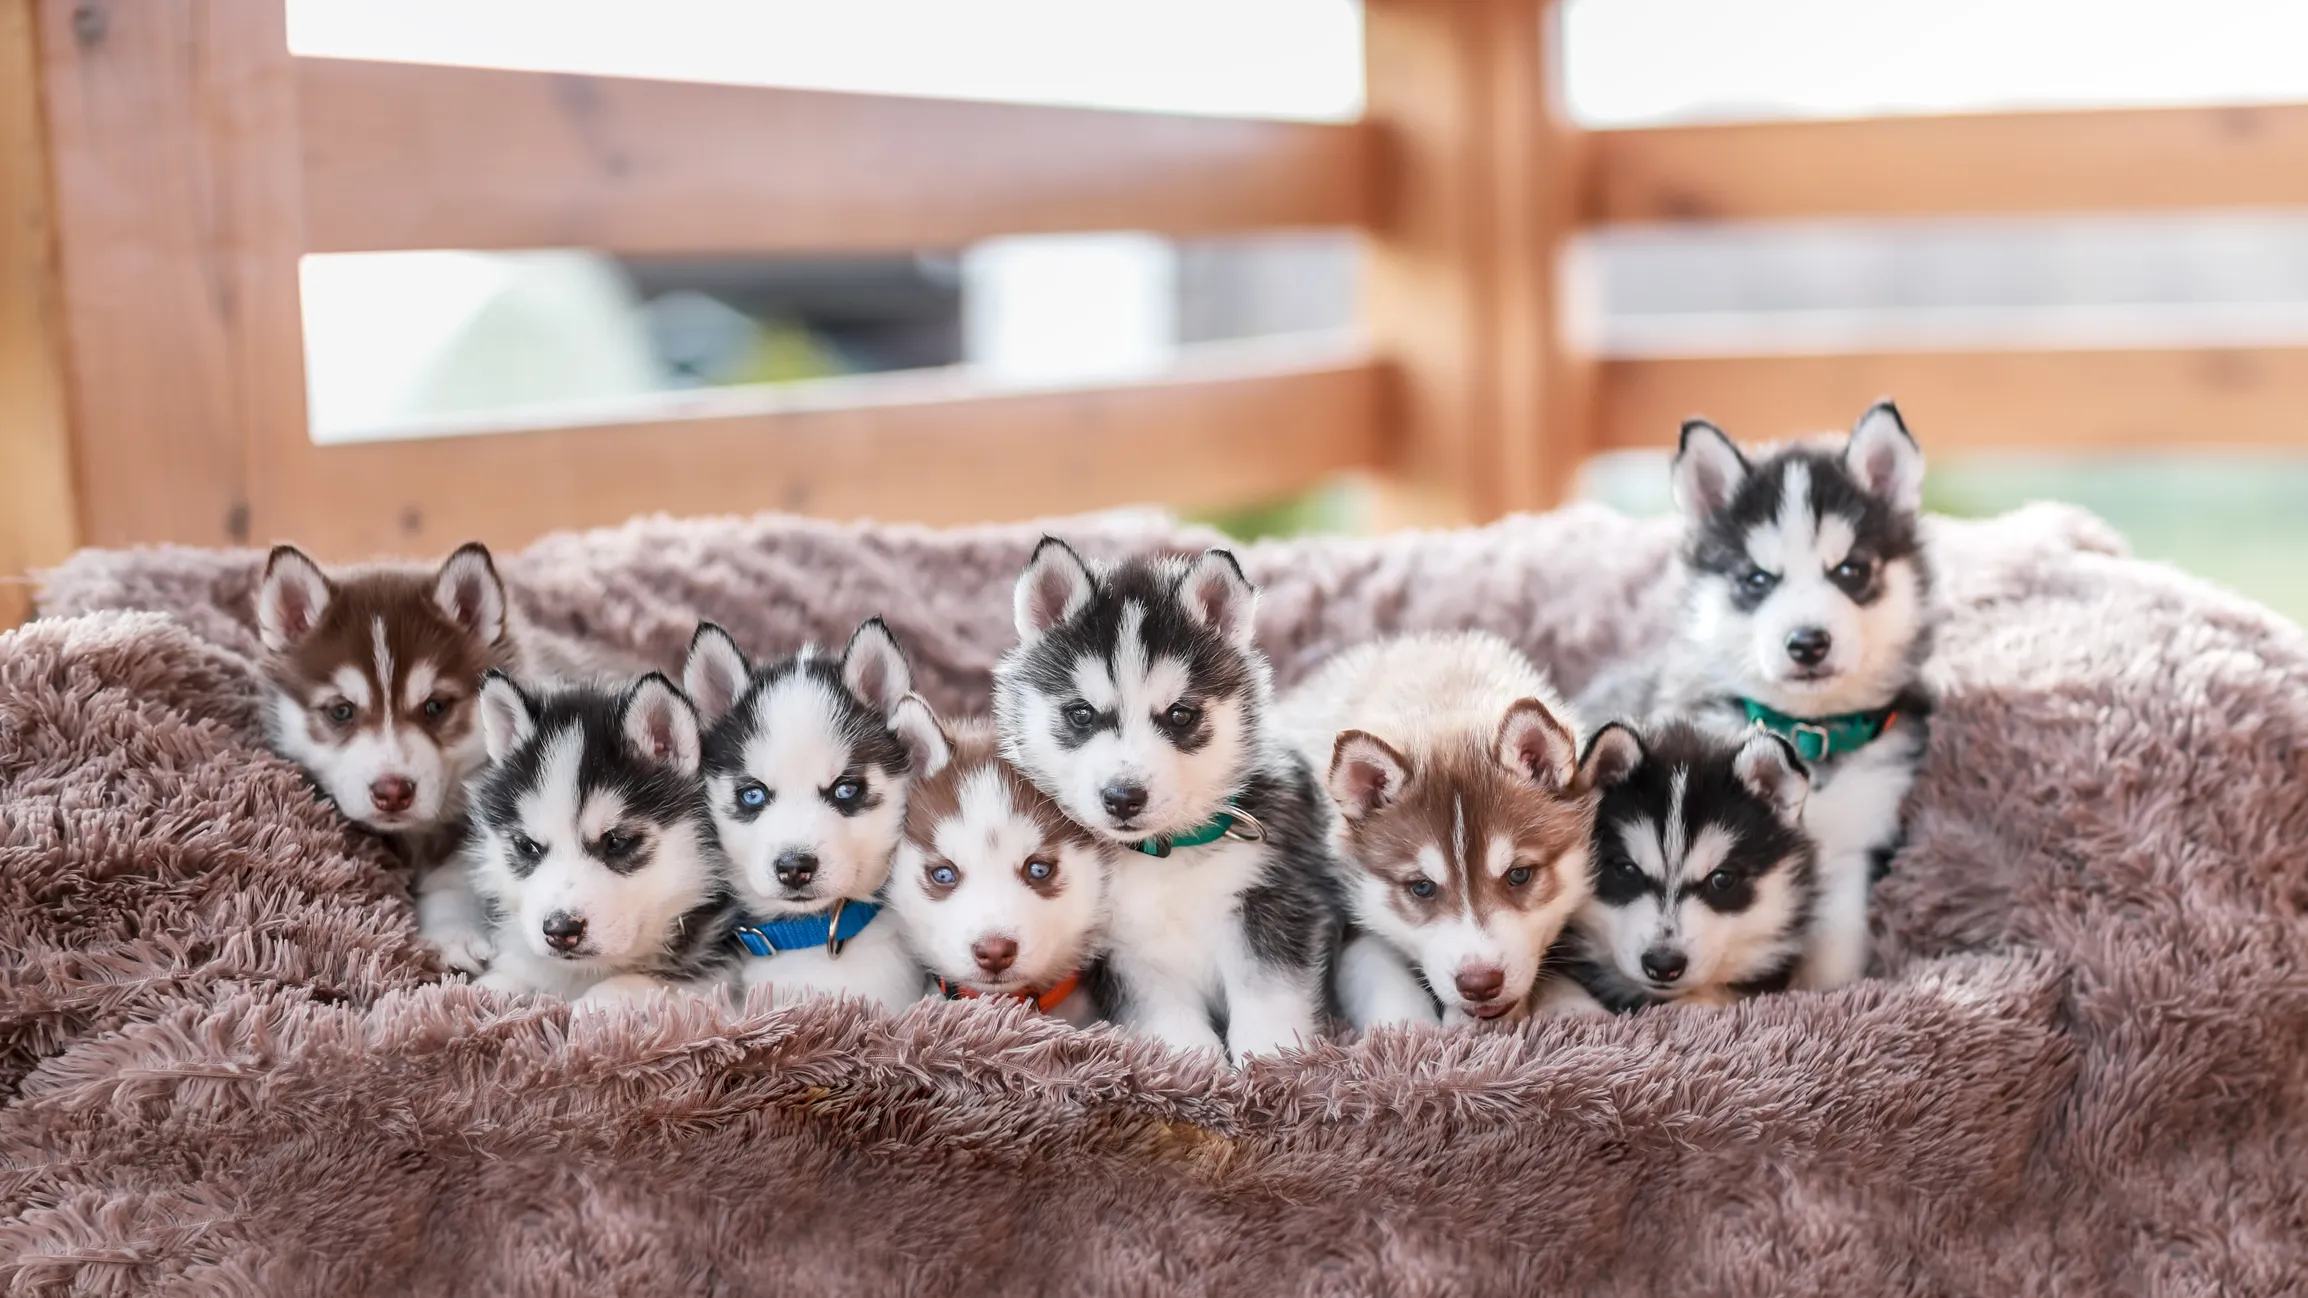 at what age should i start training my husky puppy